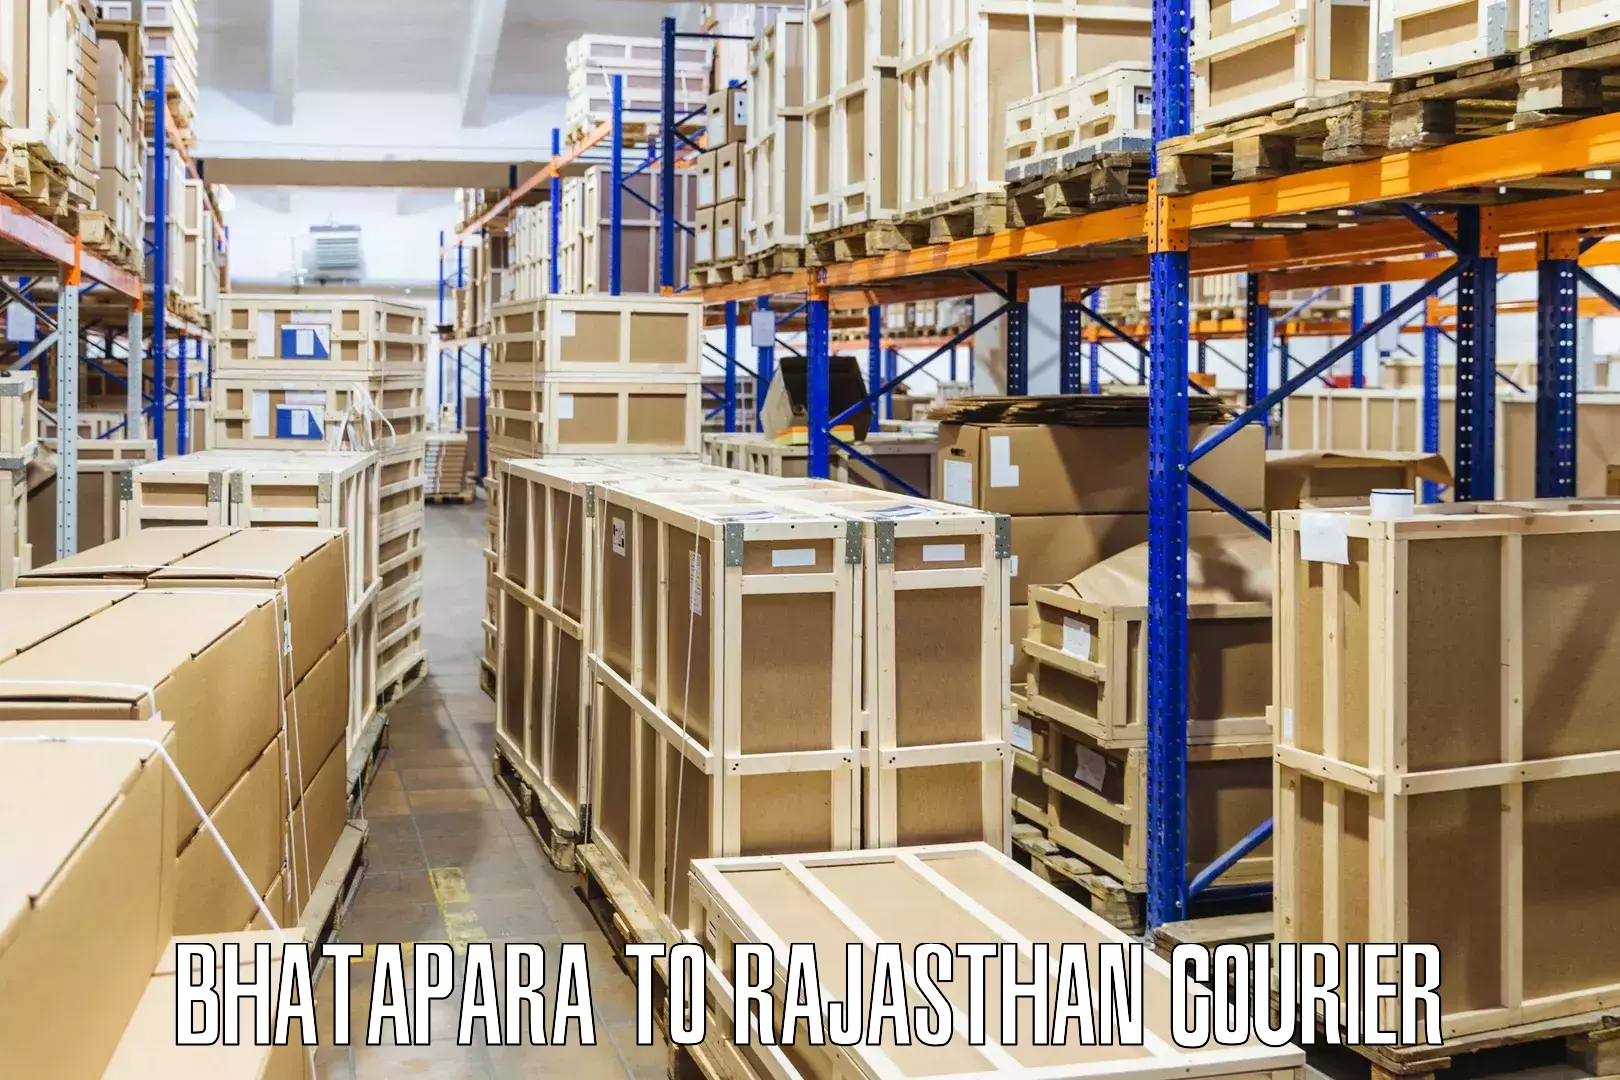 Streamlined delivery processes Bhatapara to Weir